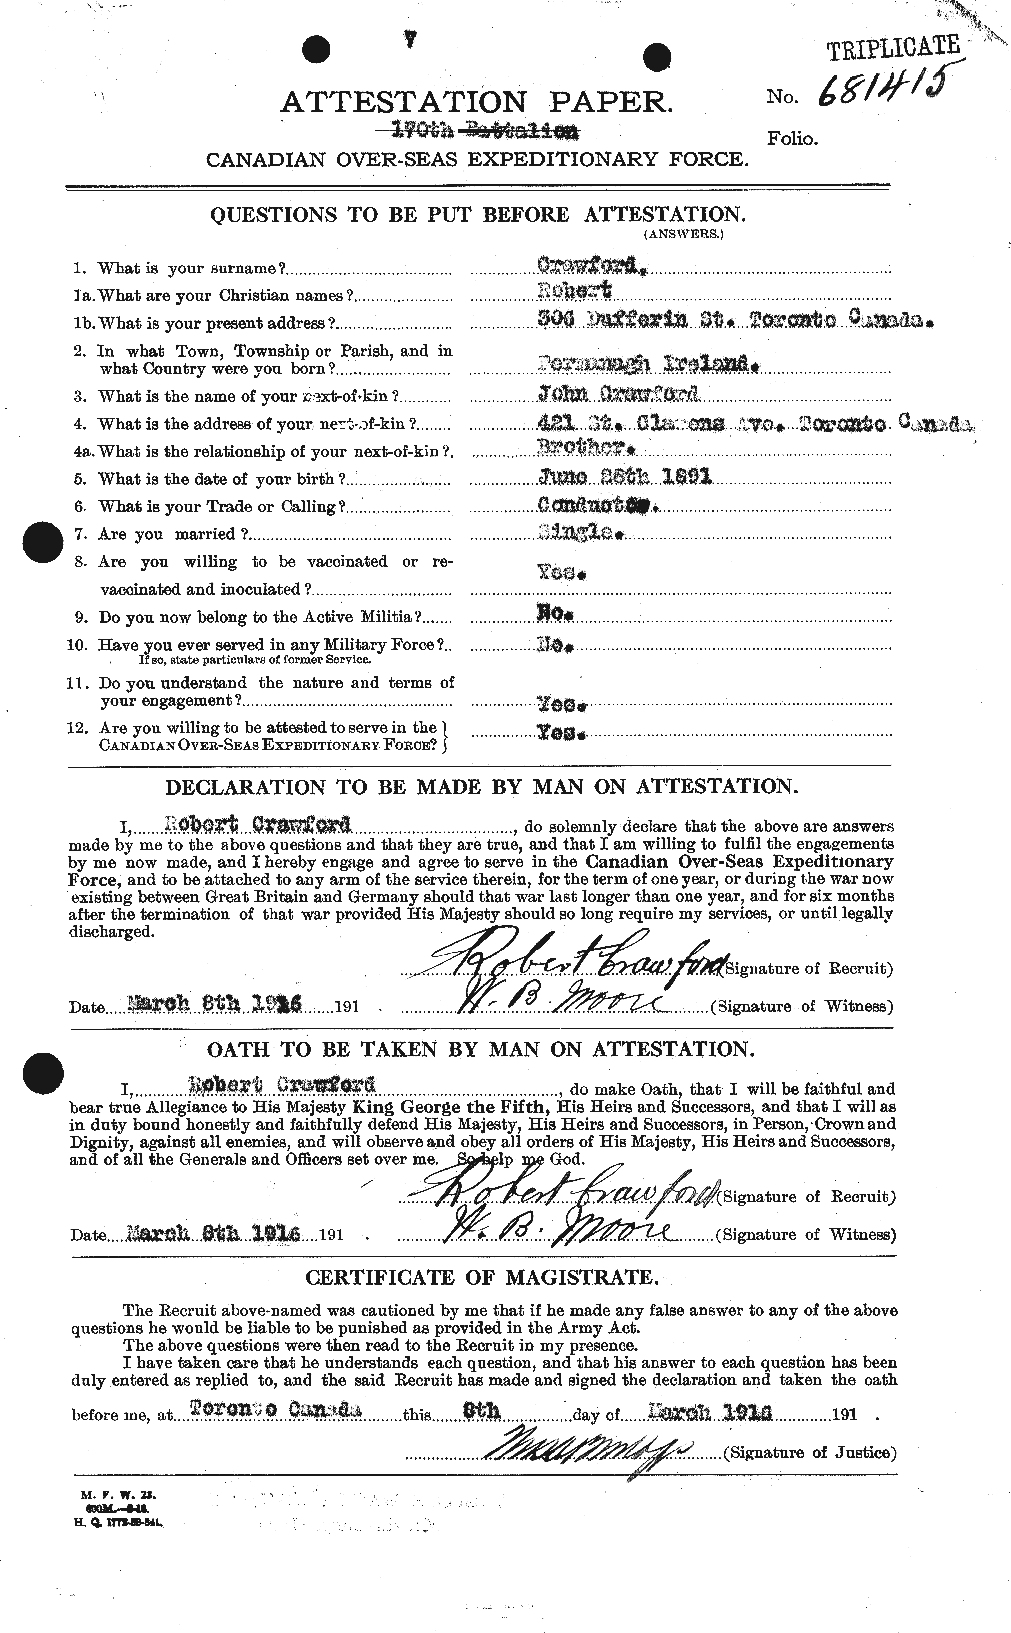 Personnel Records of the First World War - CEF 061636a